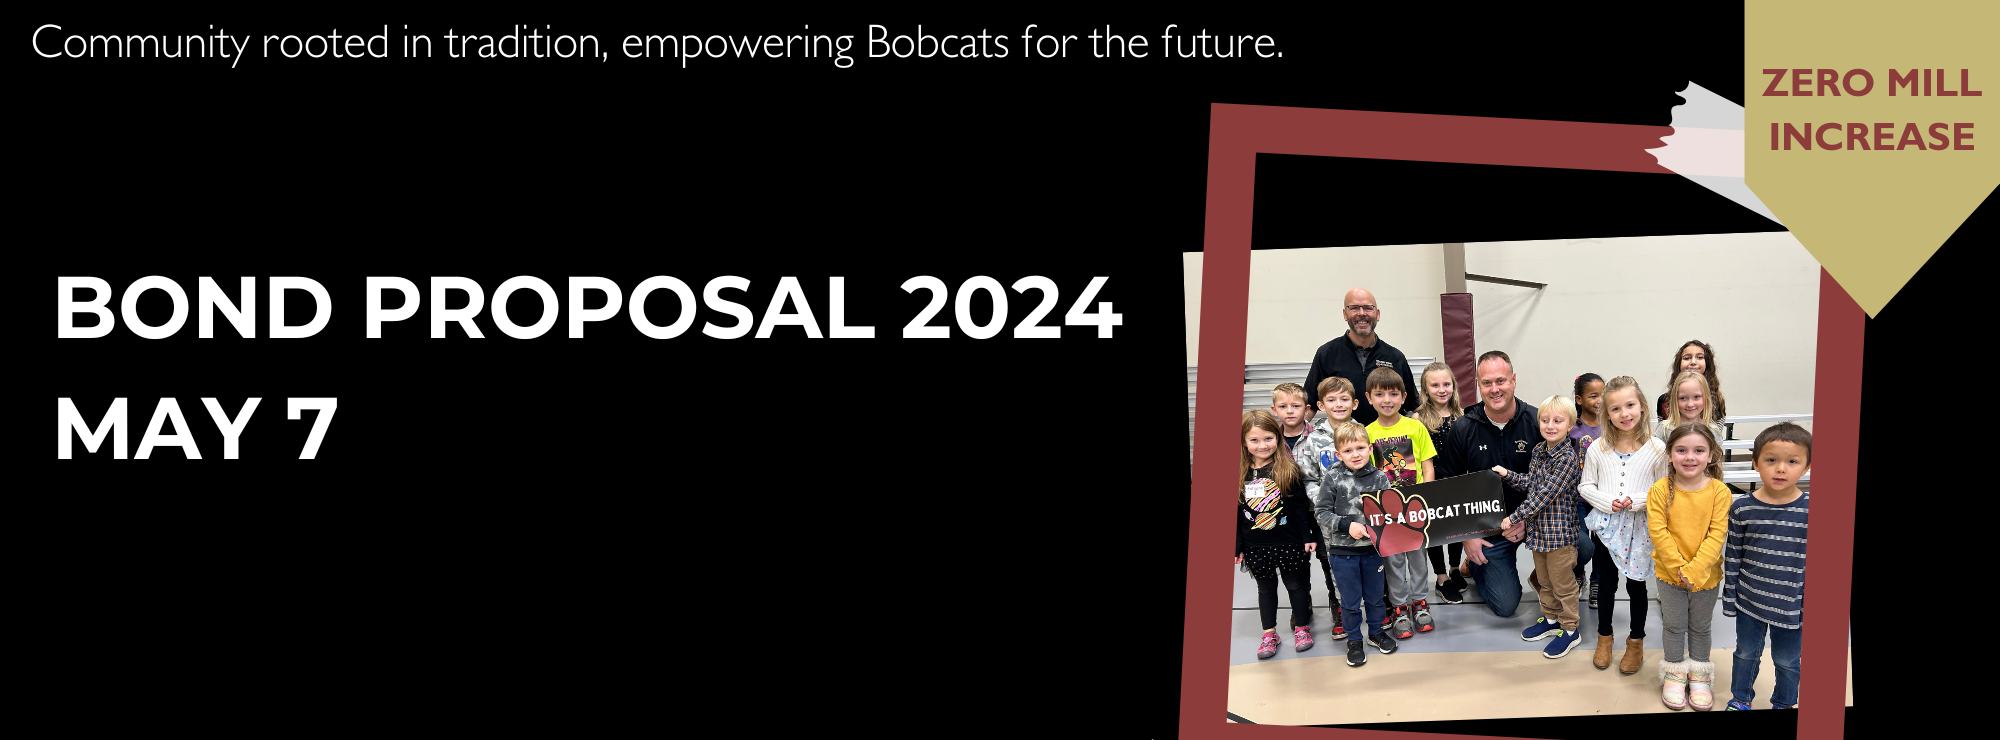  community rooted in tradition empowering bobcats for the future. Bond proposal May 2024. Zero mill increase